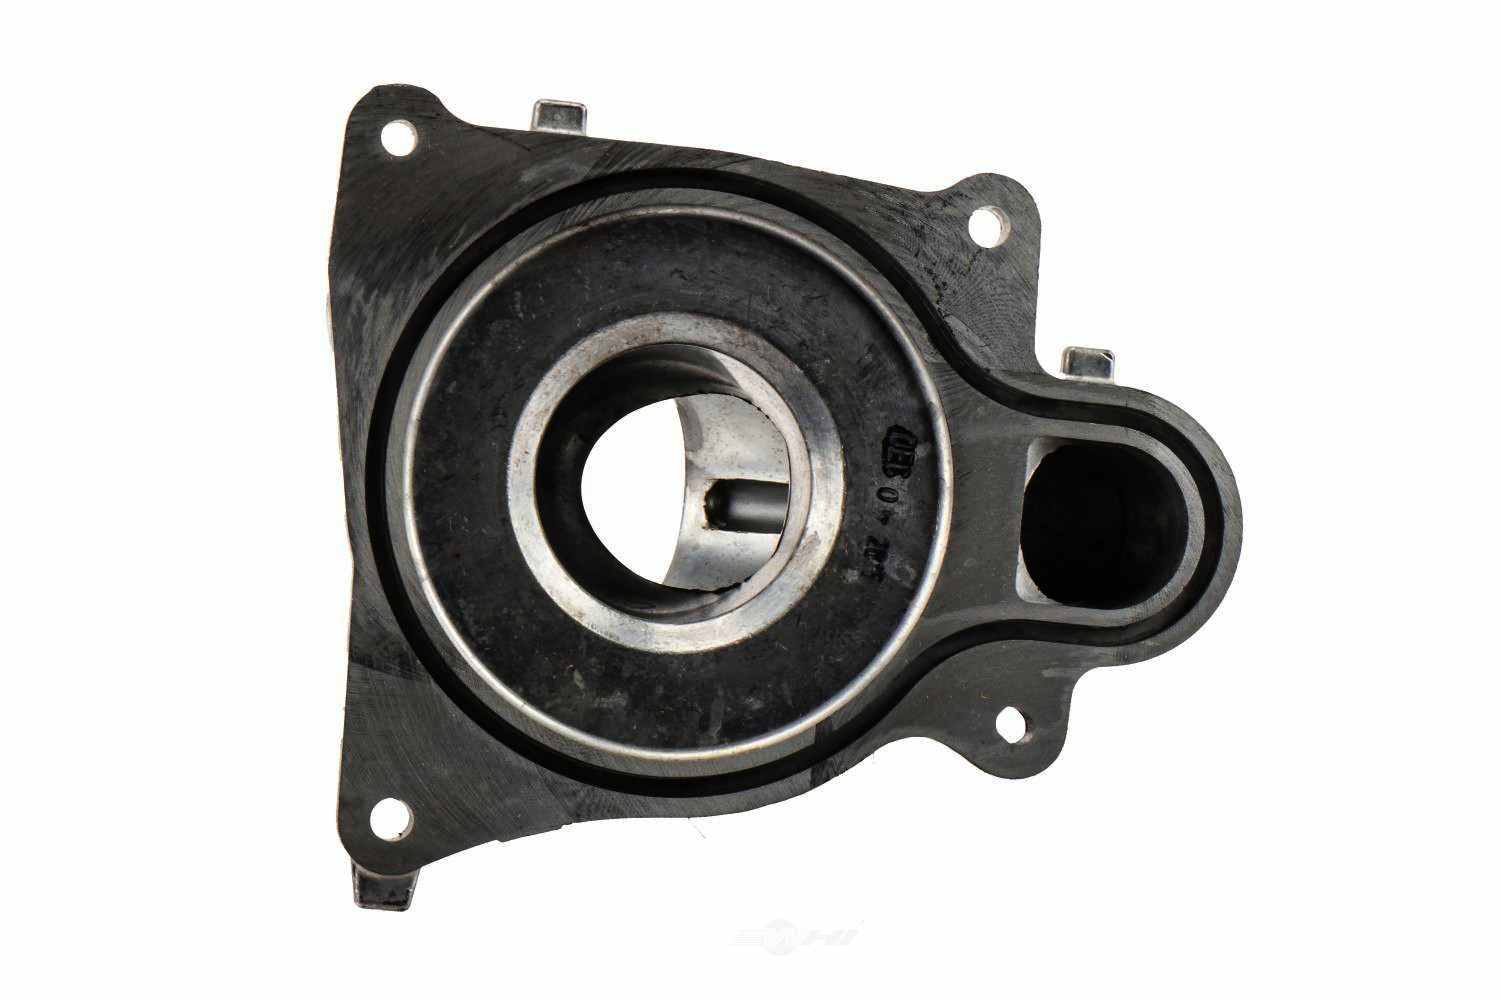 GM GENUINE PARTS - Engine Water Pump Cover - GMP 12600022